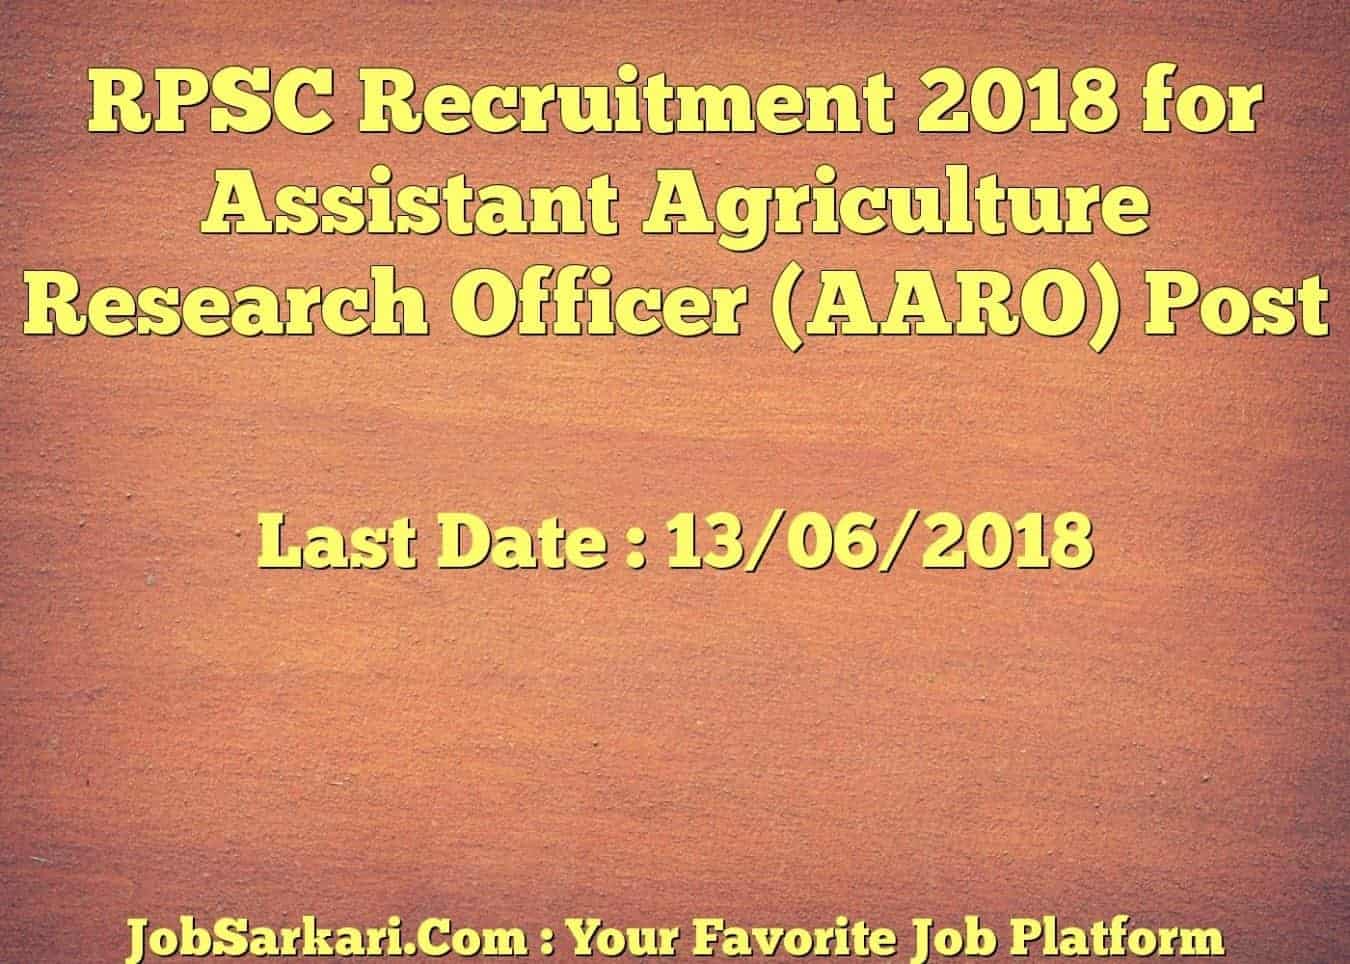 RPSC Recruitment 2018 for Assistant Agriculture Research Officer (AARO) Post